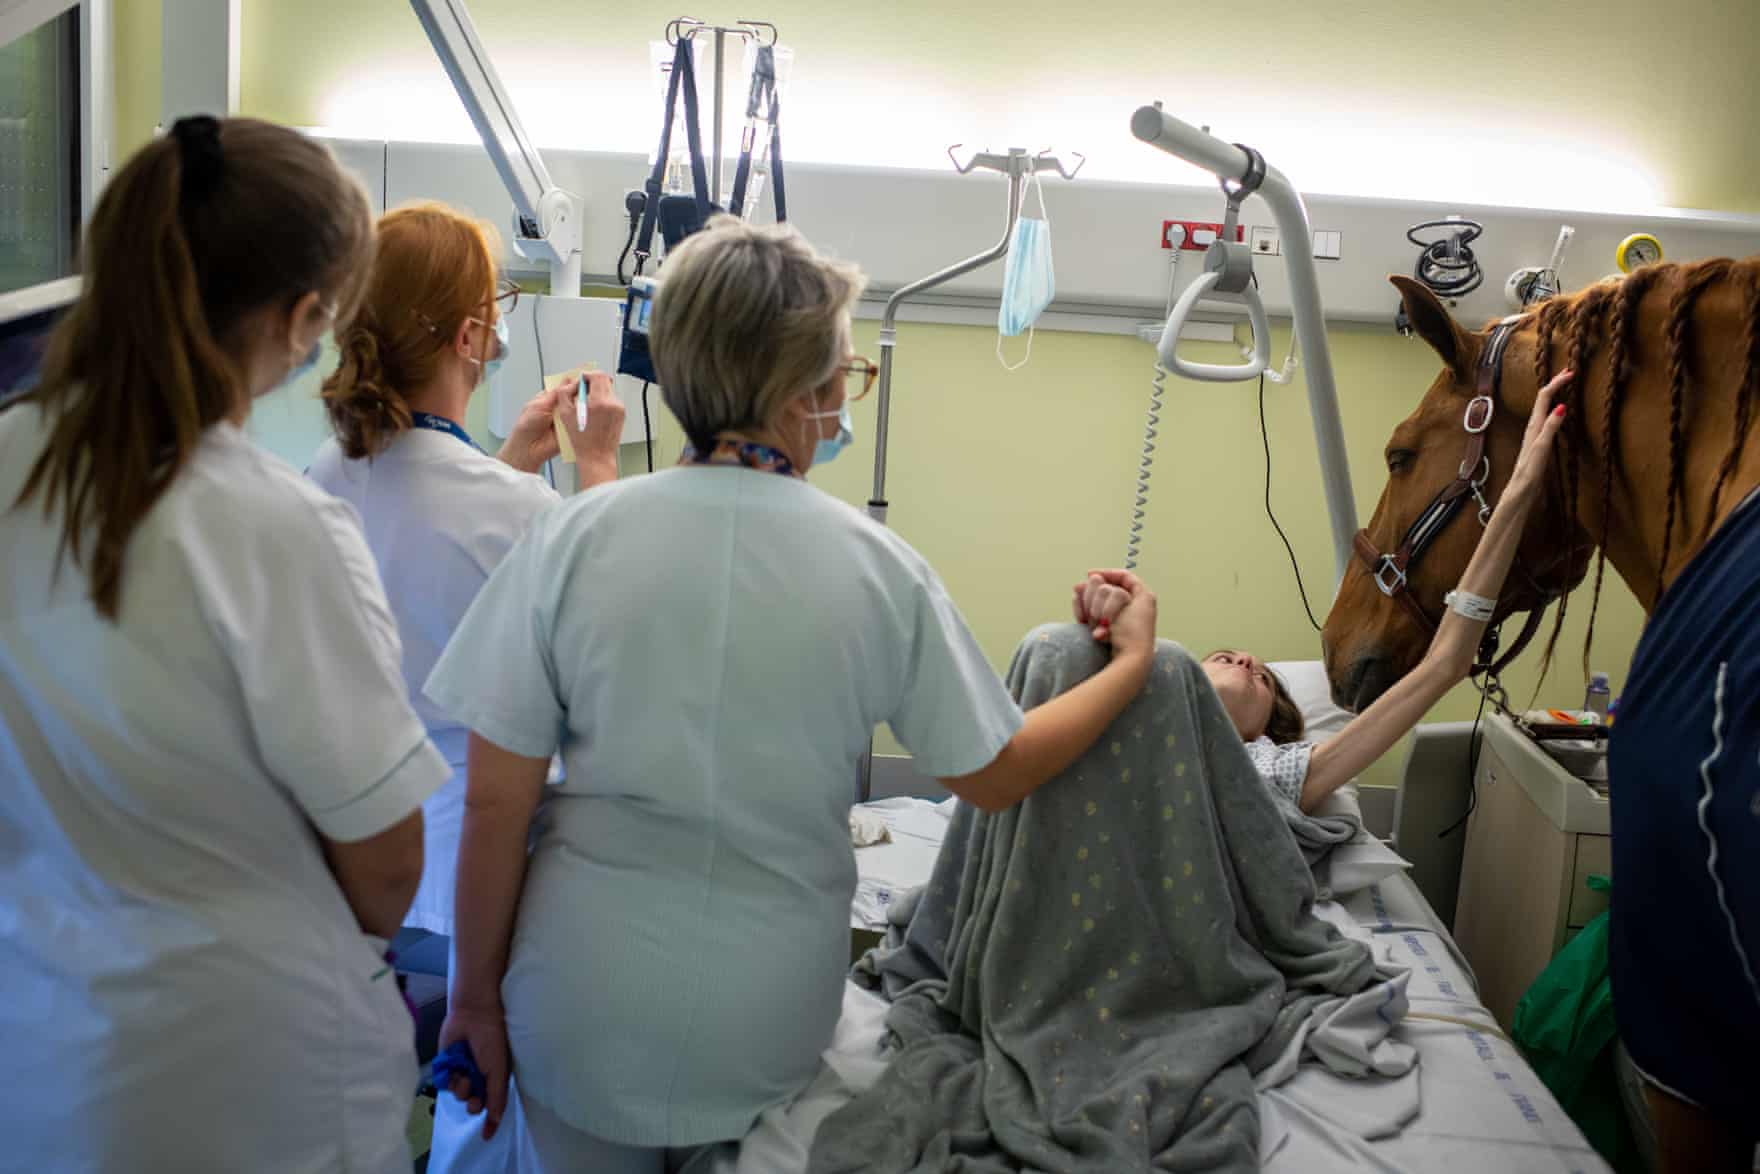 Doctor Peyo the horse at the bedside of a dying cancer patient, who reaches out to touch the horse, medical staff looking on